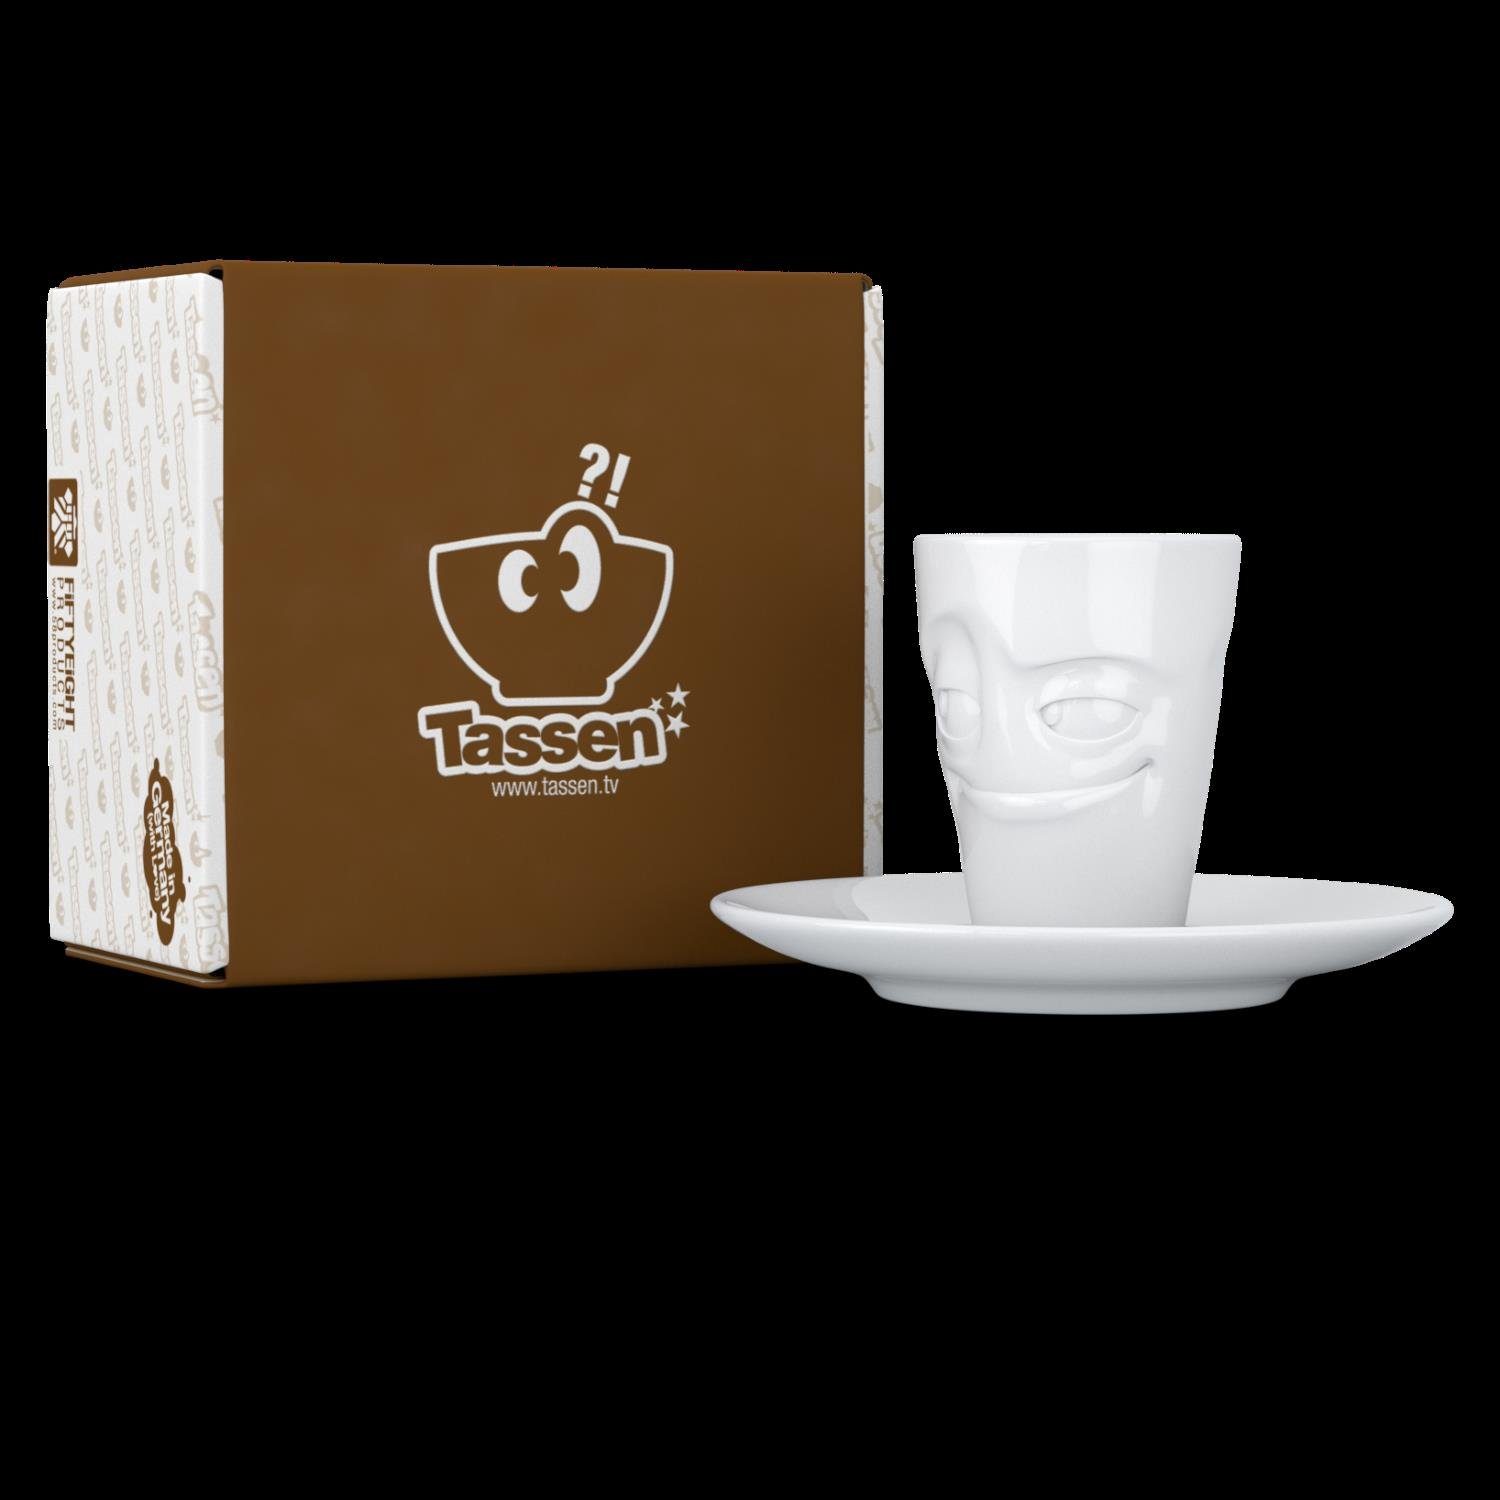 FIFTYEIGHT PRODUCTS Tasse Fiftyeight Products Espresso Mug mit Henkel -